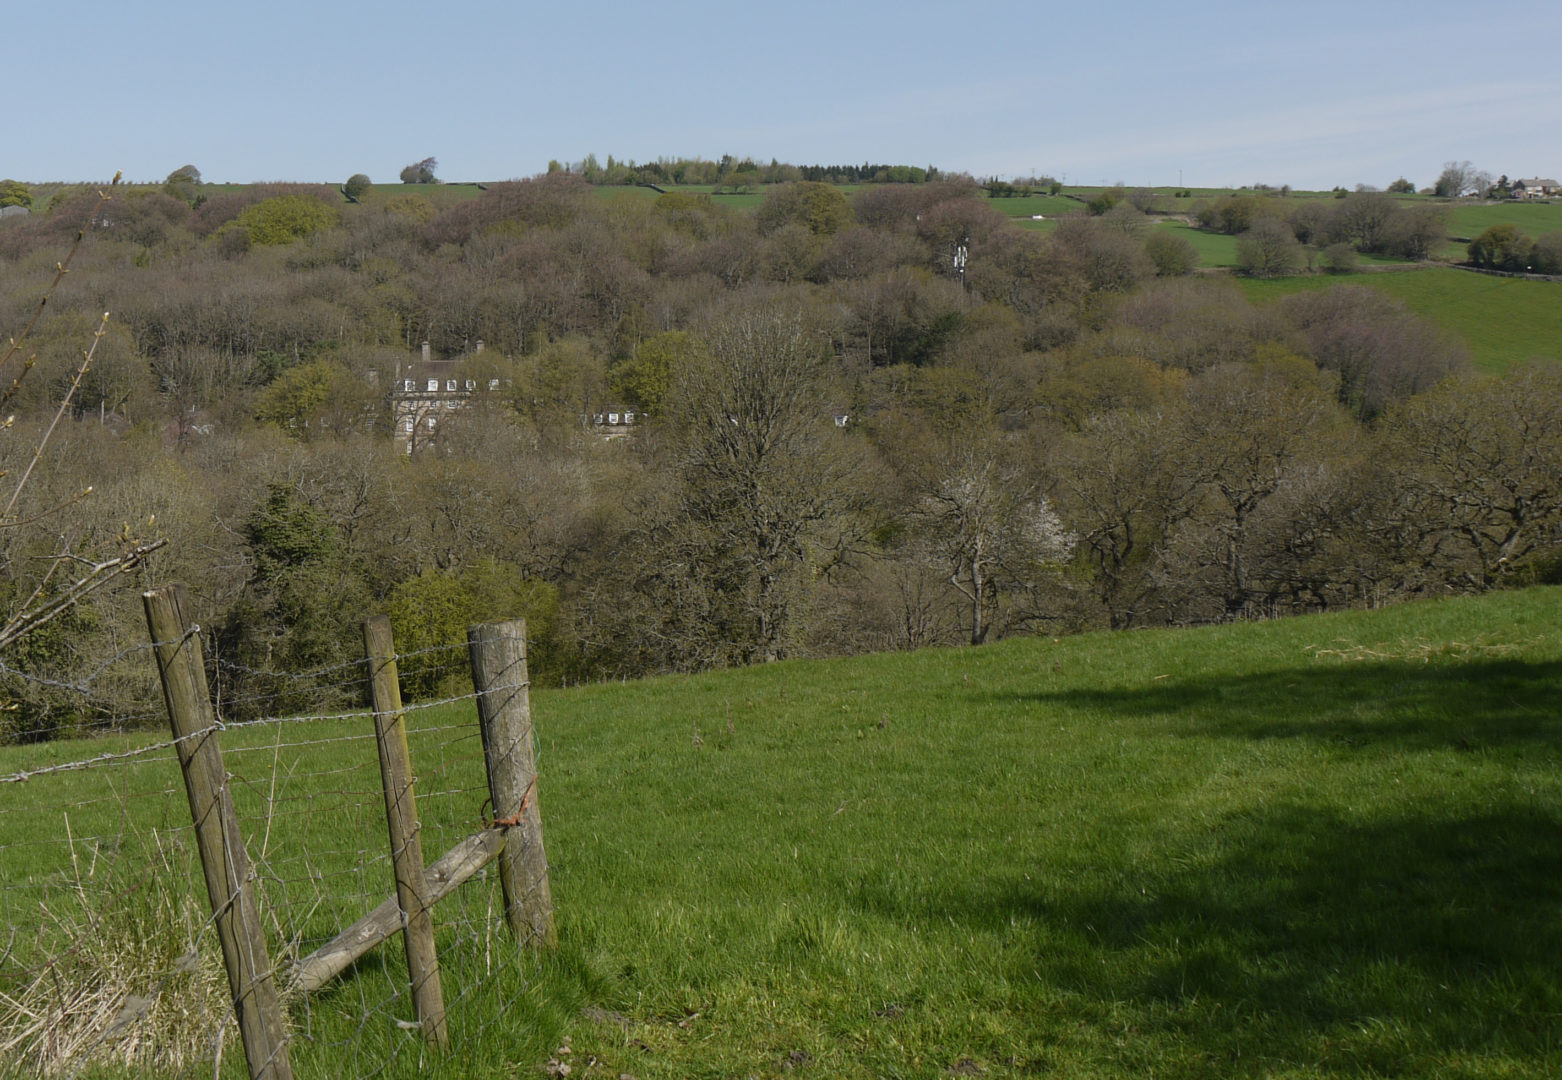 A view across the Rivelin Valley to the old Edward VII hospital in the trees, thankfully without an opencast coal mine above it